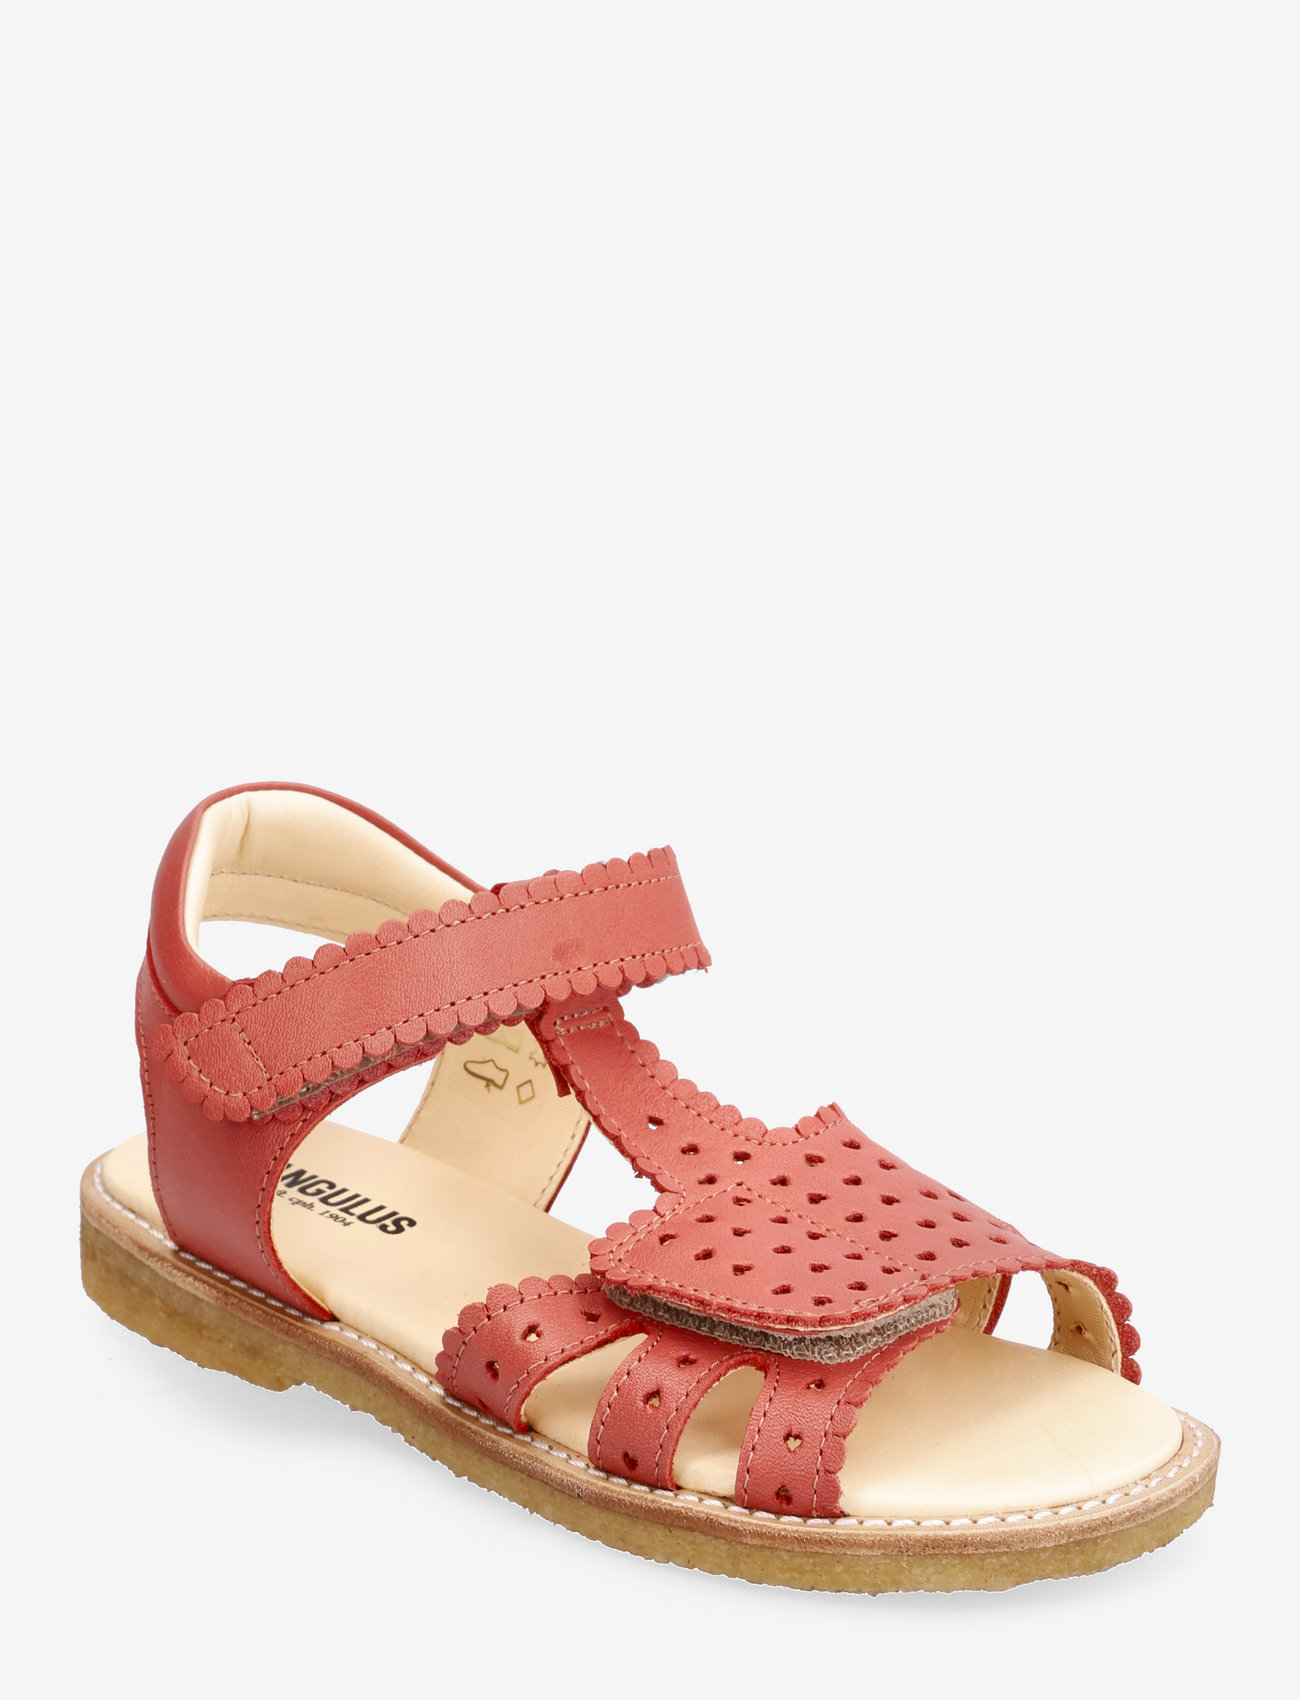 ANGULUS - Sandals - flat - spring shoes - 1591 coral - 0